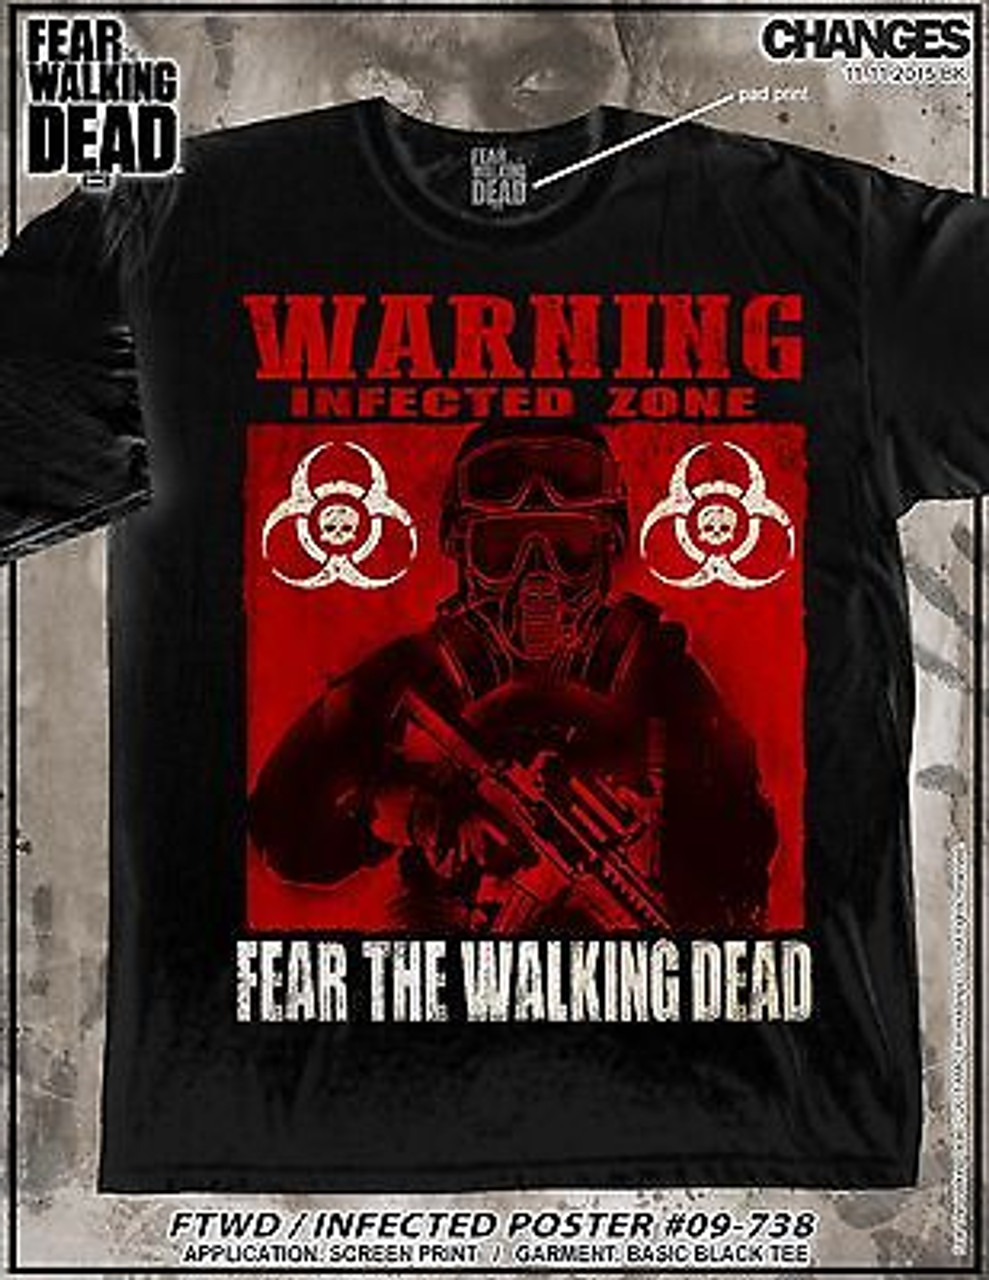 Fear The Walking Dead Infected Poster Biohazard Tv Show Zombies T Tee Shirt